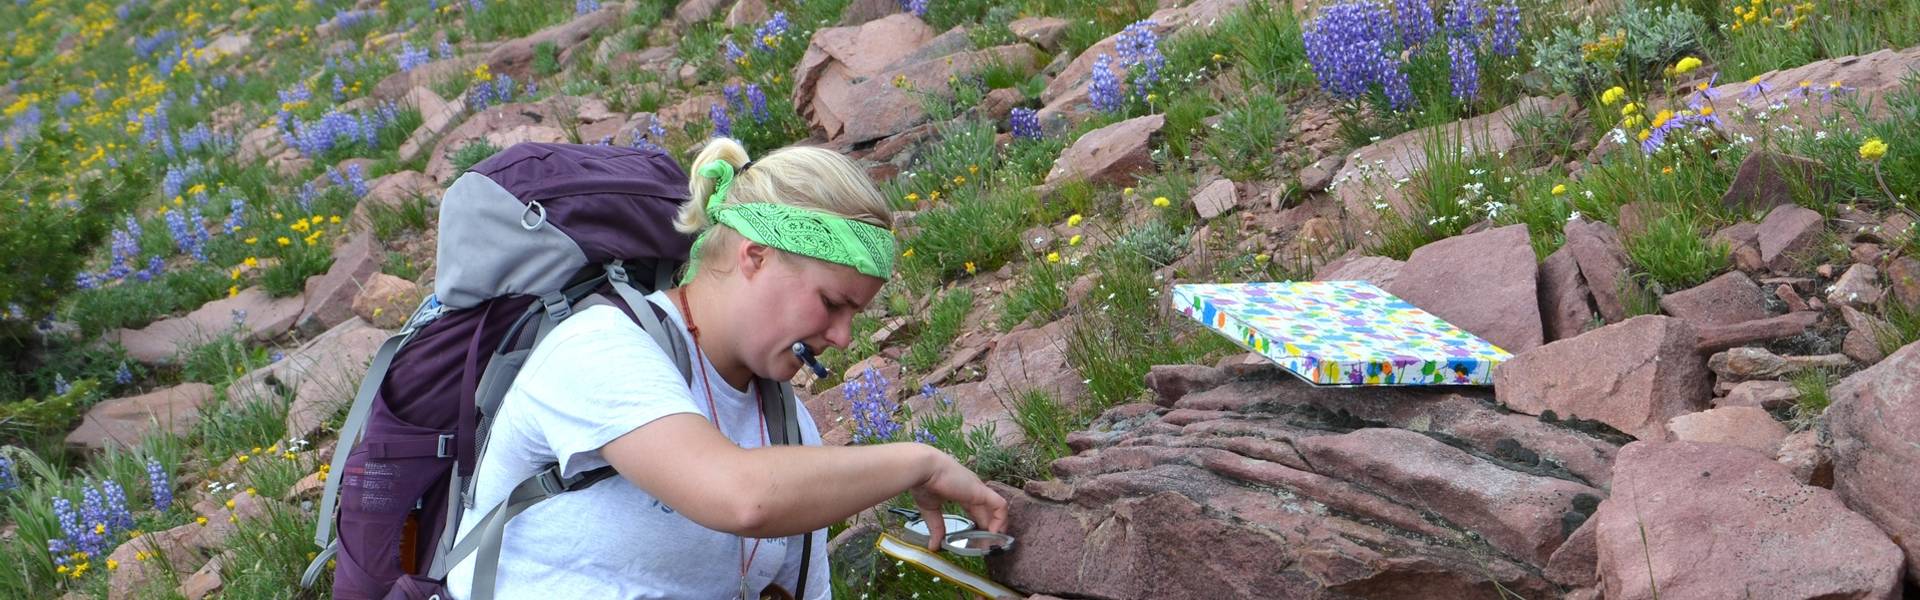 A geology student inspects a small formation of rocks.